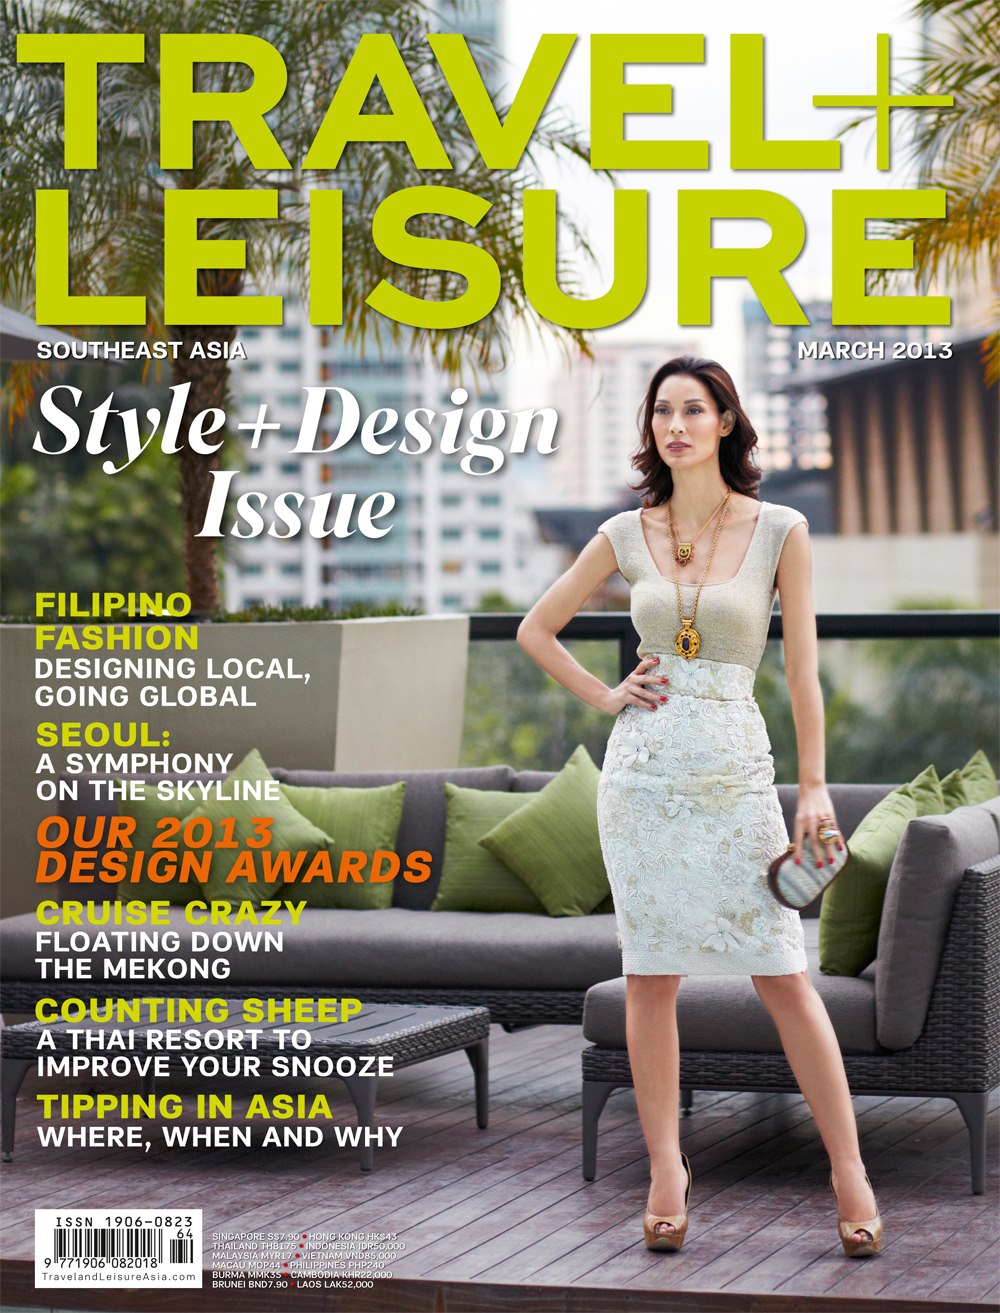 Piña skirt by Rajo Laurel (knit top by Tan-Gan) as seen here on Joey Mead (mentor for Asia's Next Top Model) for the cover of Travel+Leisure (another proud Pinoy moment!); Photography by Paco Guerrero